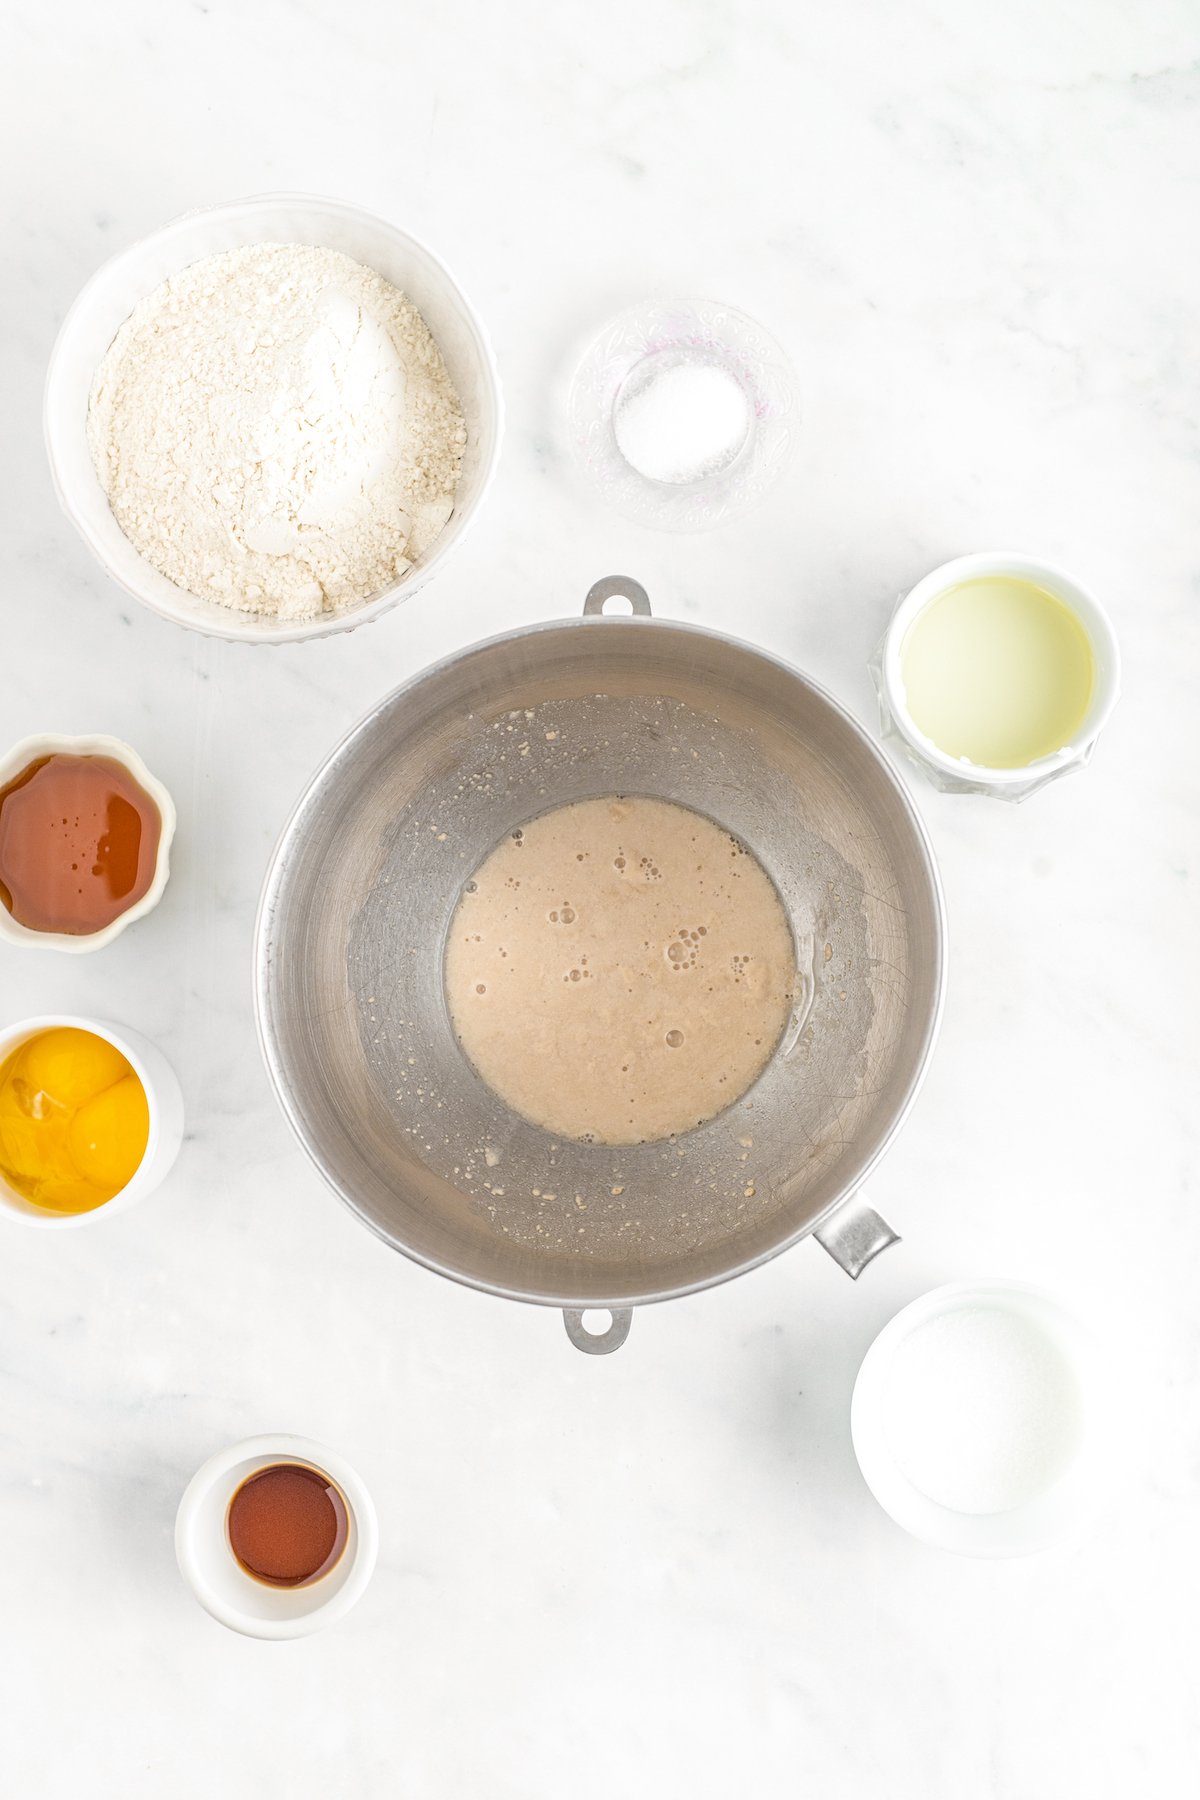 Yeast proving in a mixing bowl, with dishes of other ingredients arranged around the mixing bowl on the table.